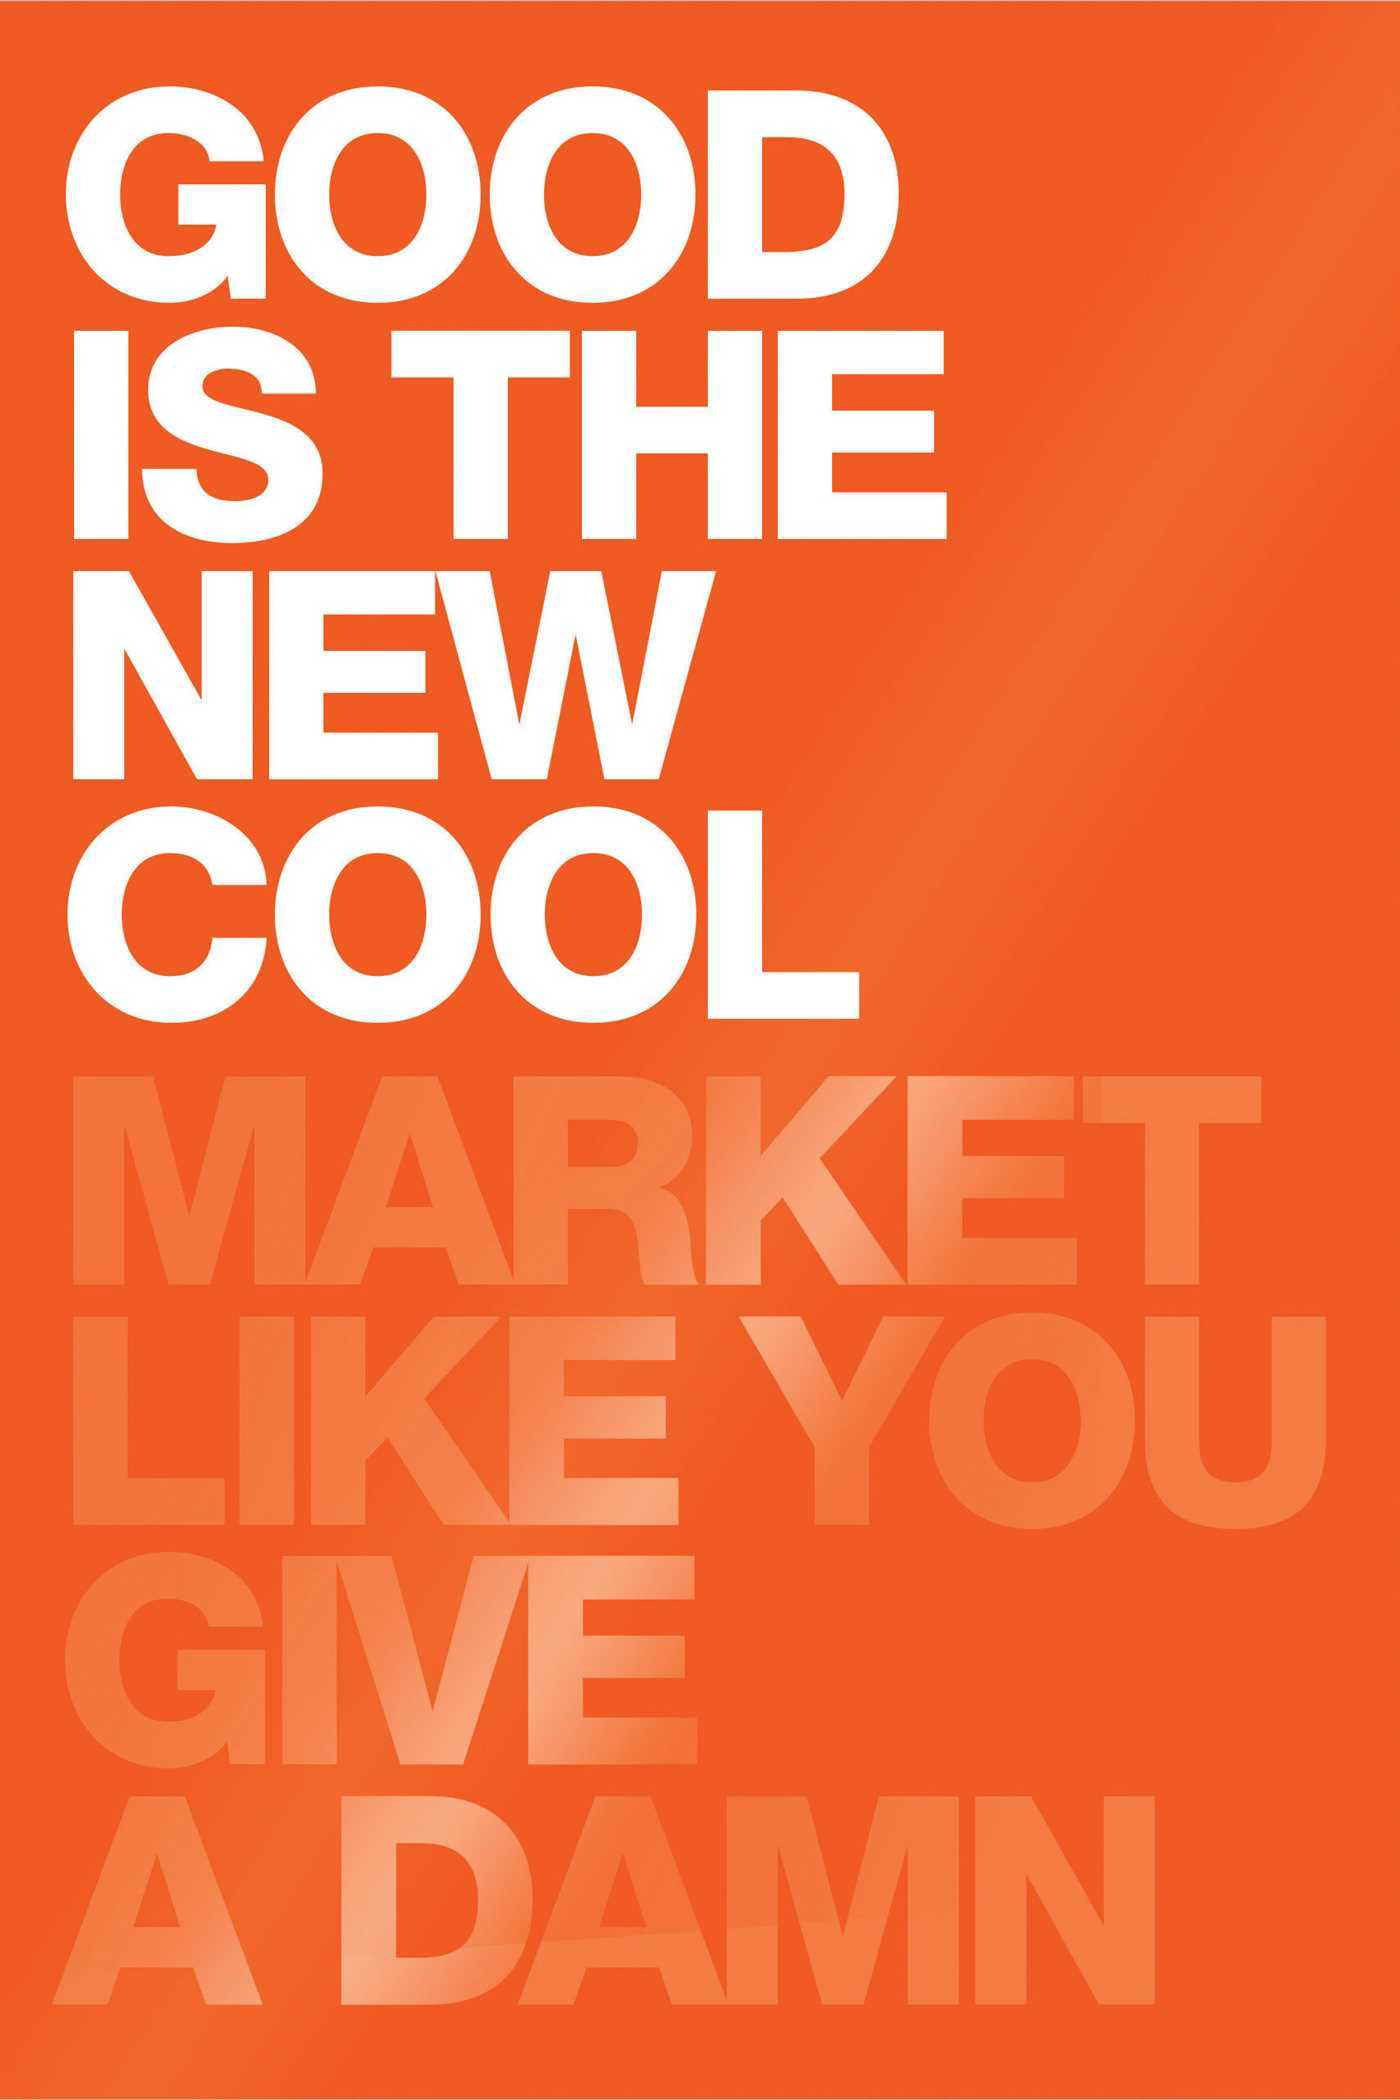 Good Is the New Cool: Market Like You Give a Damn by  Afdhel Aziz & Bobby Jones